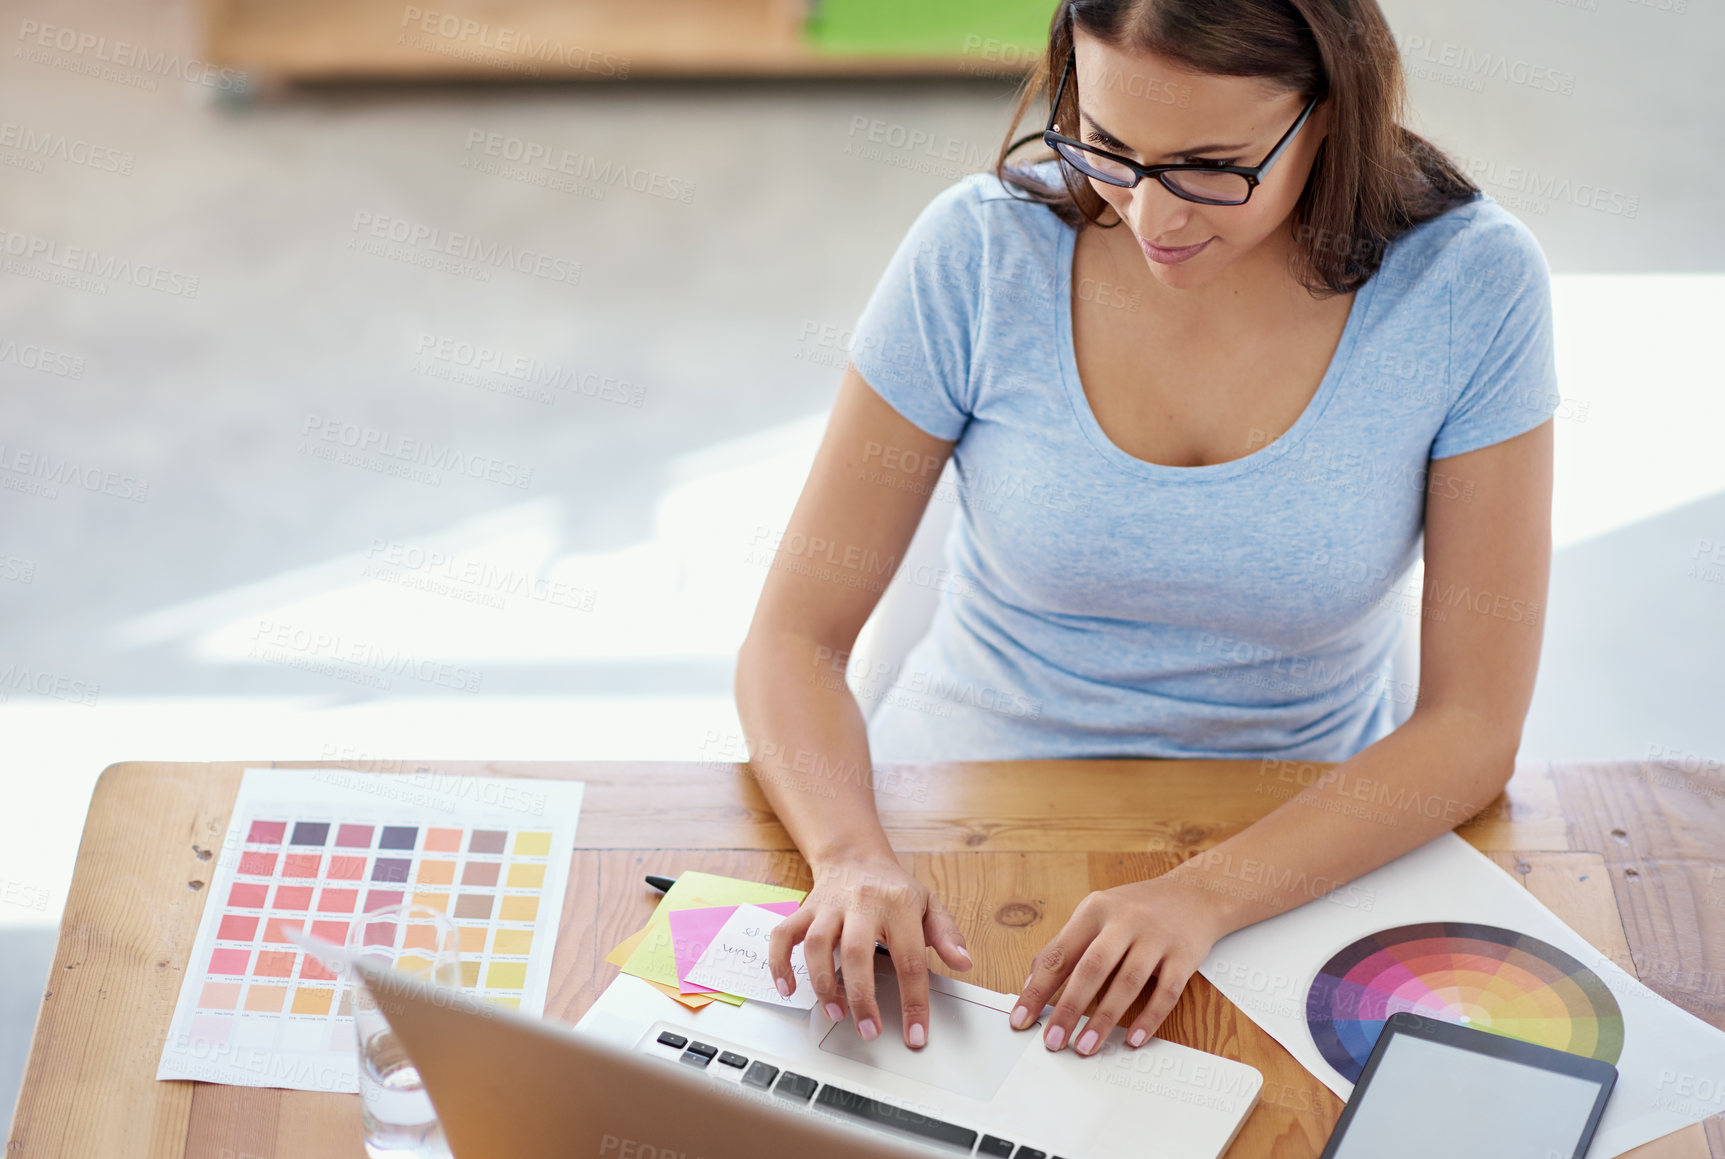 Buy stock photo Cropped shot of a female designer working on a project at her desk